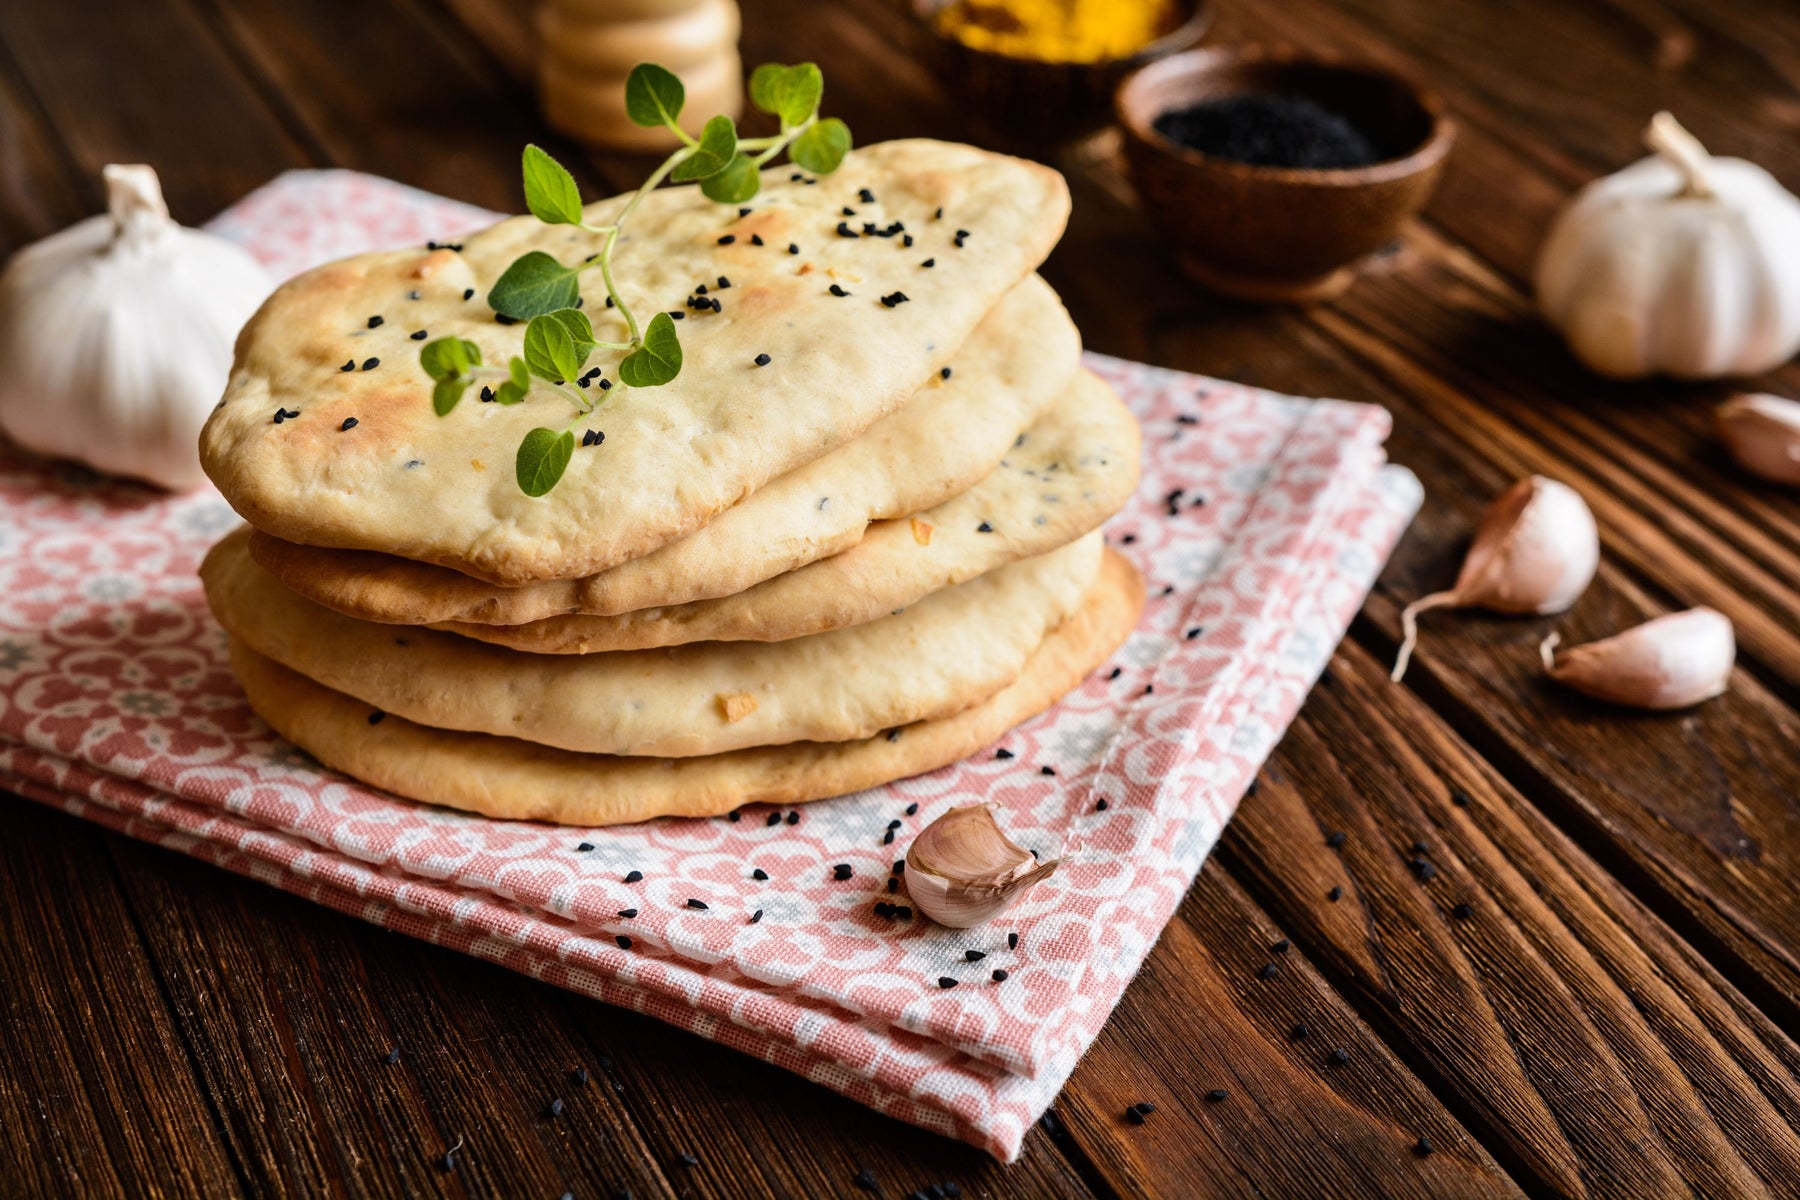 Naan Bread with Nigella Seeds: A Delicious and Aromatic Flatbread